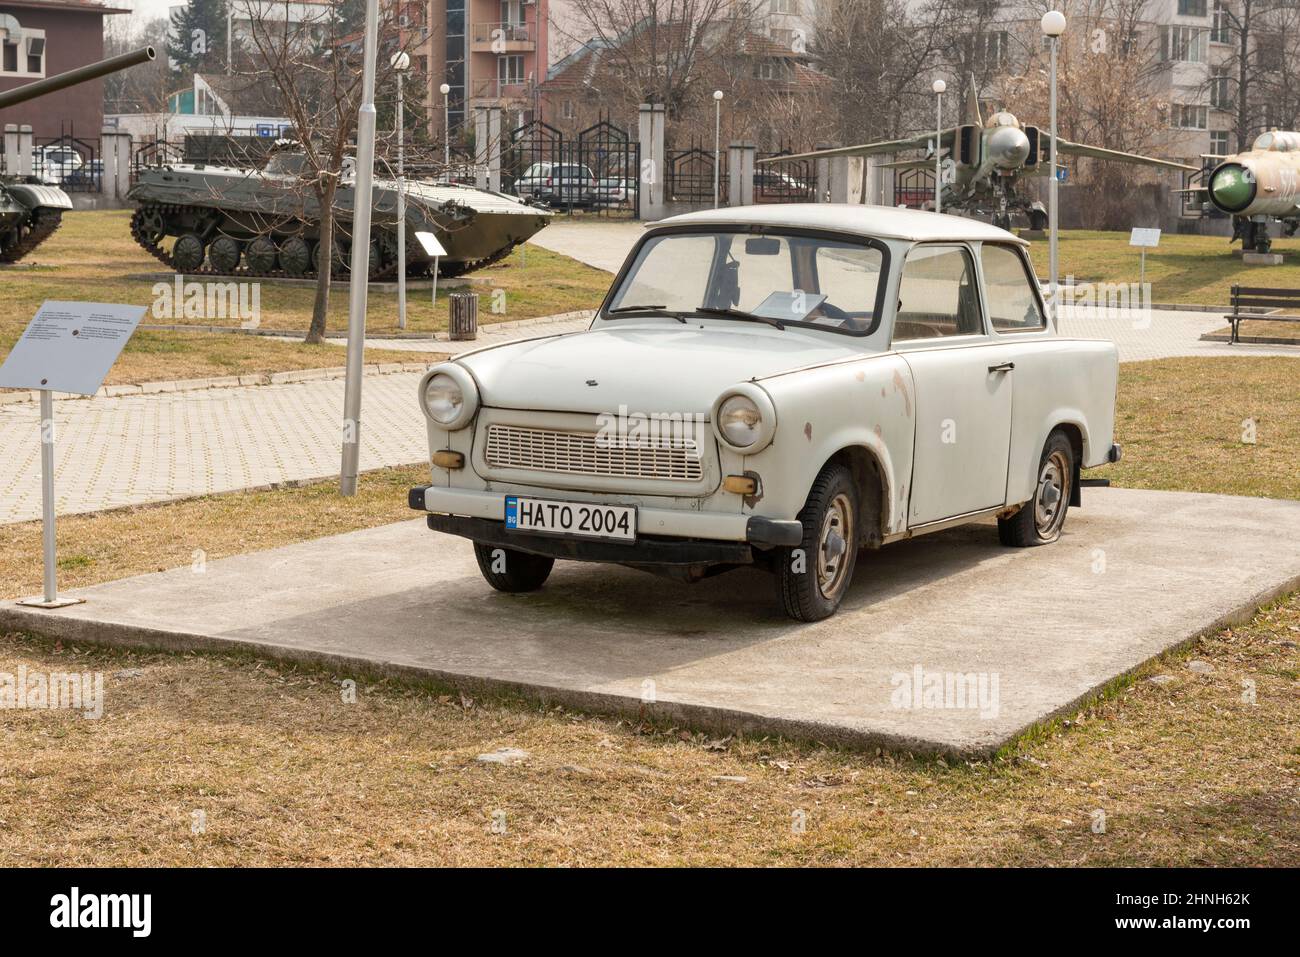 Trabant 601 with NATO 2004 license plate as a symbol for Bulgaria's accession to NATO at the National Museum of Military History in Sofia, Bulgaria Stock Photo